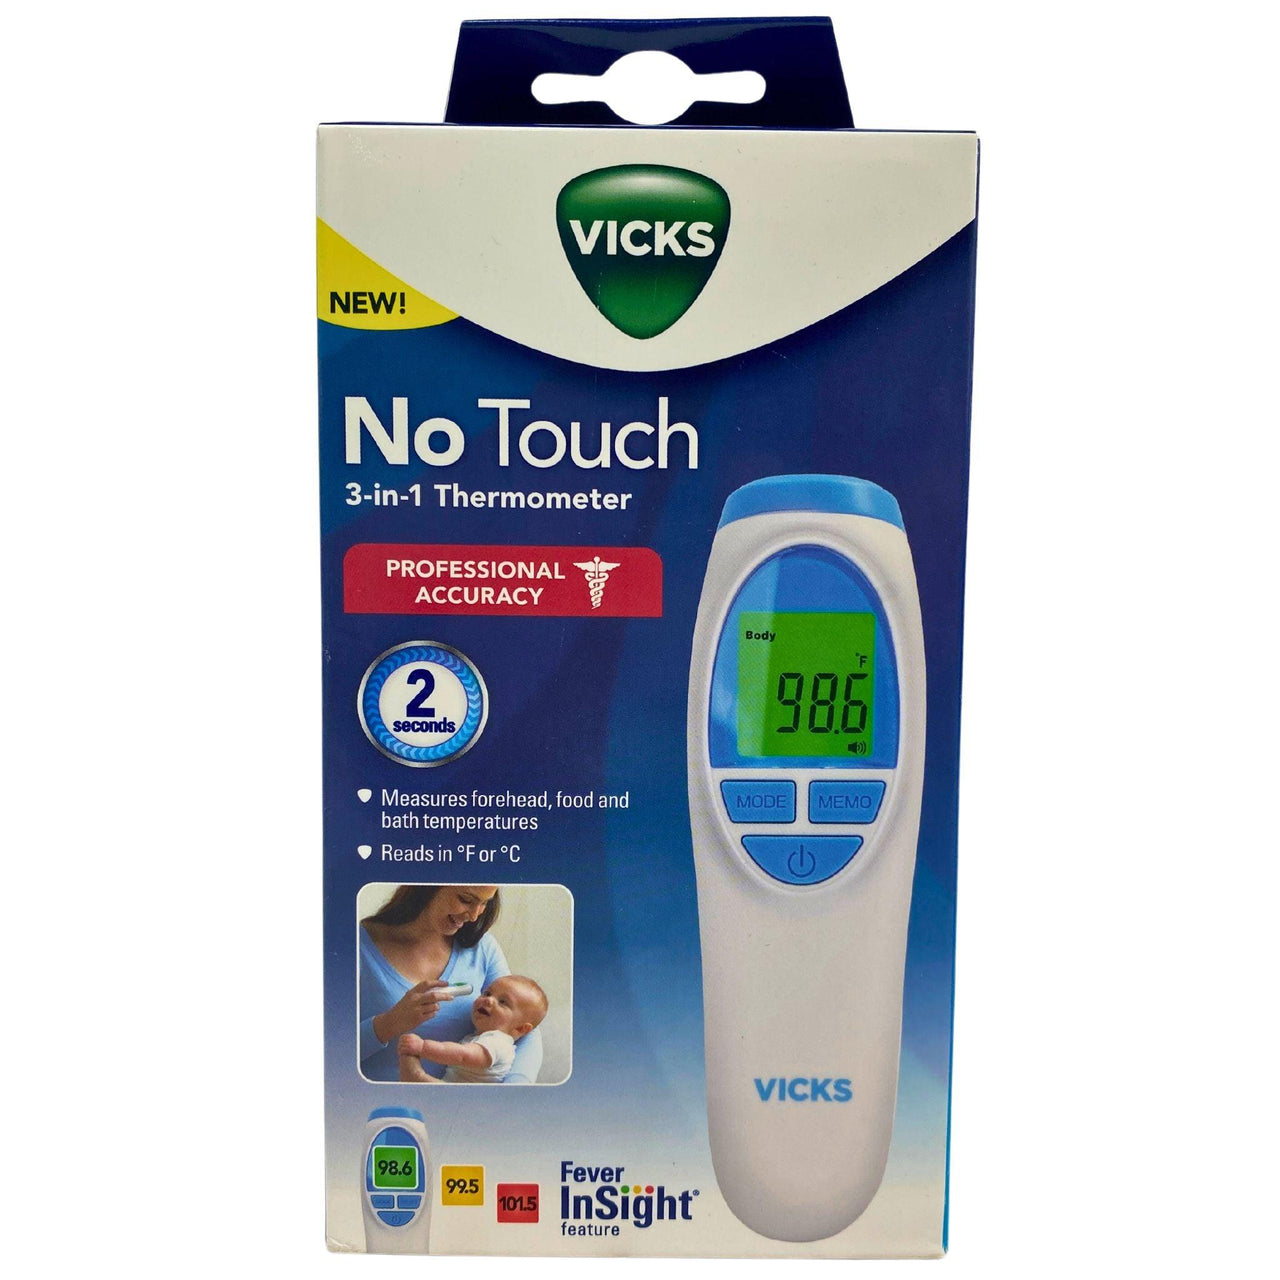 Vicks New! No Touch 3-in-1 Thermometer (50 Pcs Lot) - Discount Wholesalers Inc